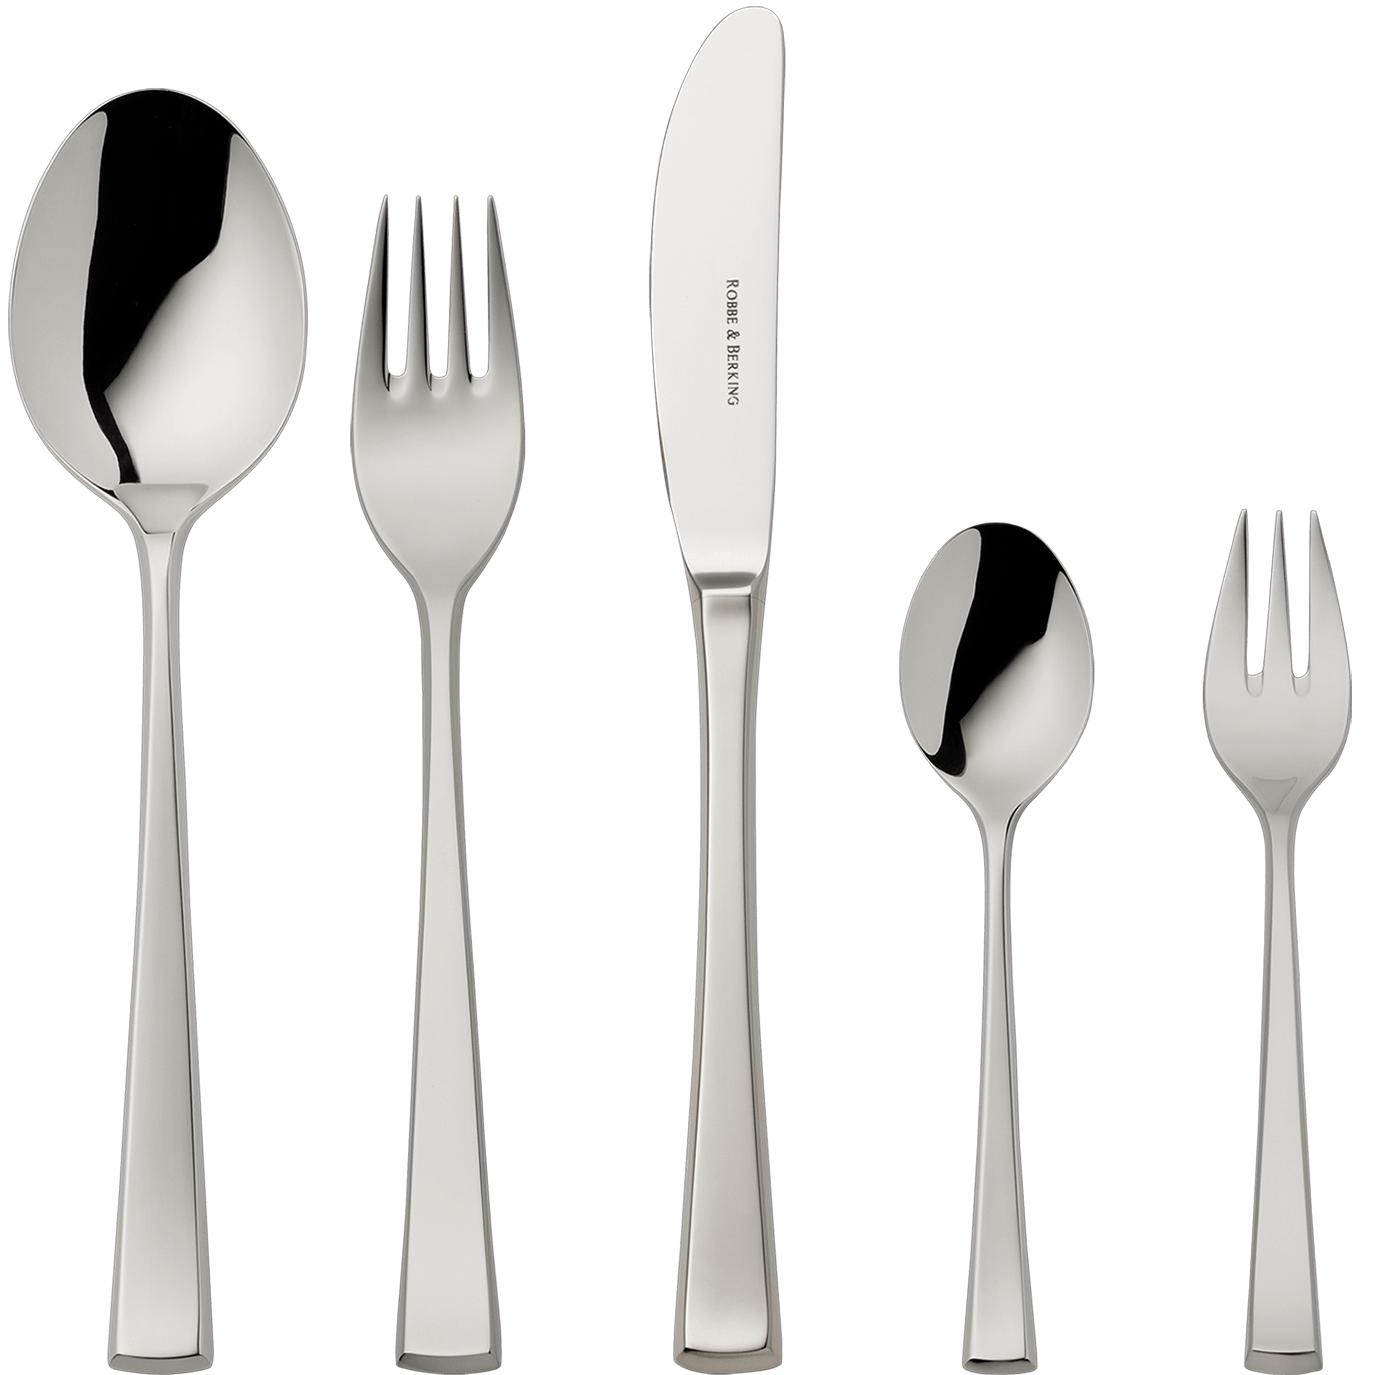 York 5-piece place setting (18/8 stainless steel)